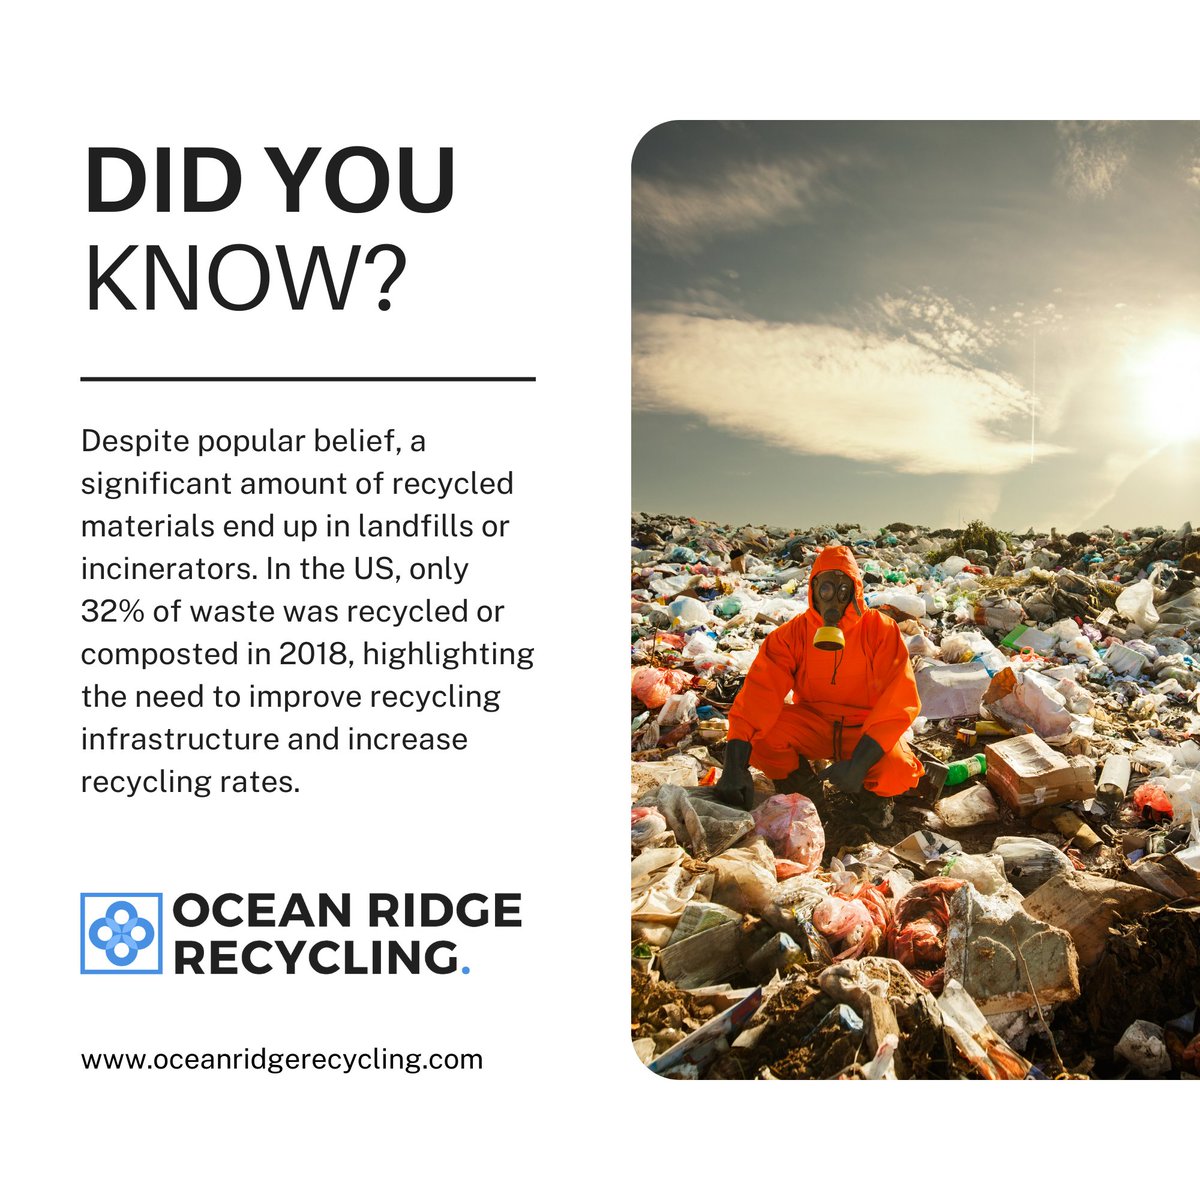 Did You Know?

Make a difference for our planet. Contact us at info@oceanridgerecycling.com or call us at +1 (800) 277-3680 to see how you can help.

#oceanridgerecycling #savetheplanet #zerowaste #recyclingcompany #waste #sustainableliving #sustainablebusiness